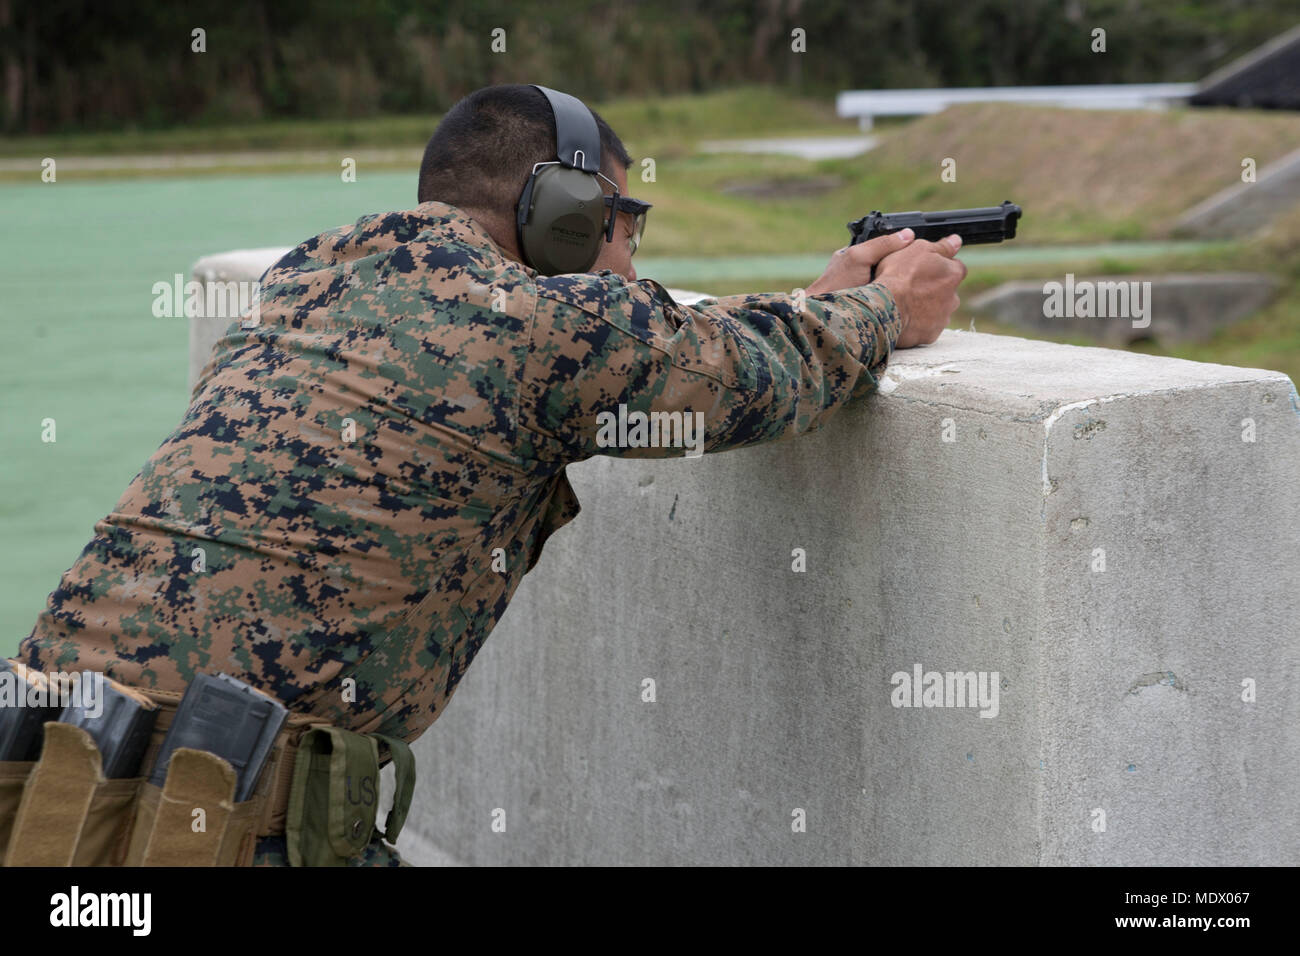 Gunnery Sgt. Don Mendiola, the spectrum manager with the 31st Marine Expeditionary Unit, prepares to fire an M9 service pistol during the Far East Annual Marksmanship Competition at Camp Hansen, Okinawa, Japan, Dec. 8, 2017. The competition helps improve the marksmanship, proficiency and combat readiness of the participants and is the first step toward the Marine Corps Championship in Quantico, Virginia. Competitors from the Far East, Pacific, East and West come together for the championship to learn more about marksmanship and the chance to be recruited to the Marine Corps Shooting Team. As t Stock Photo